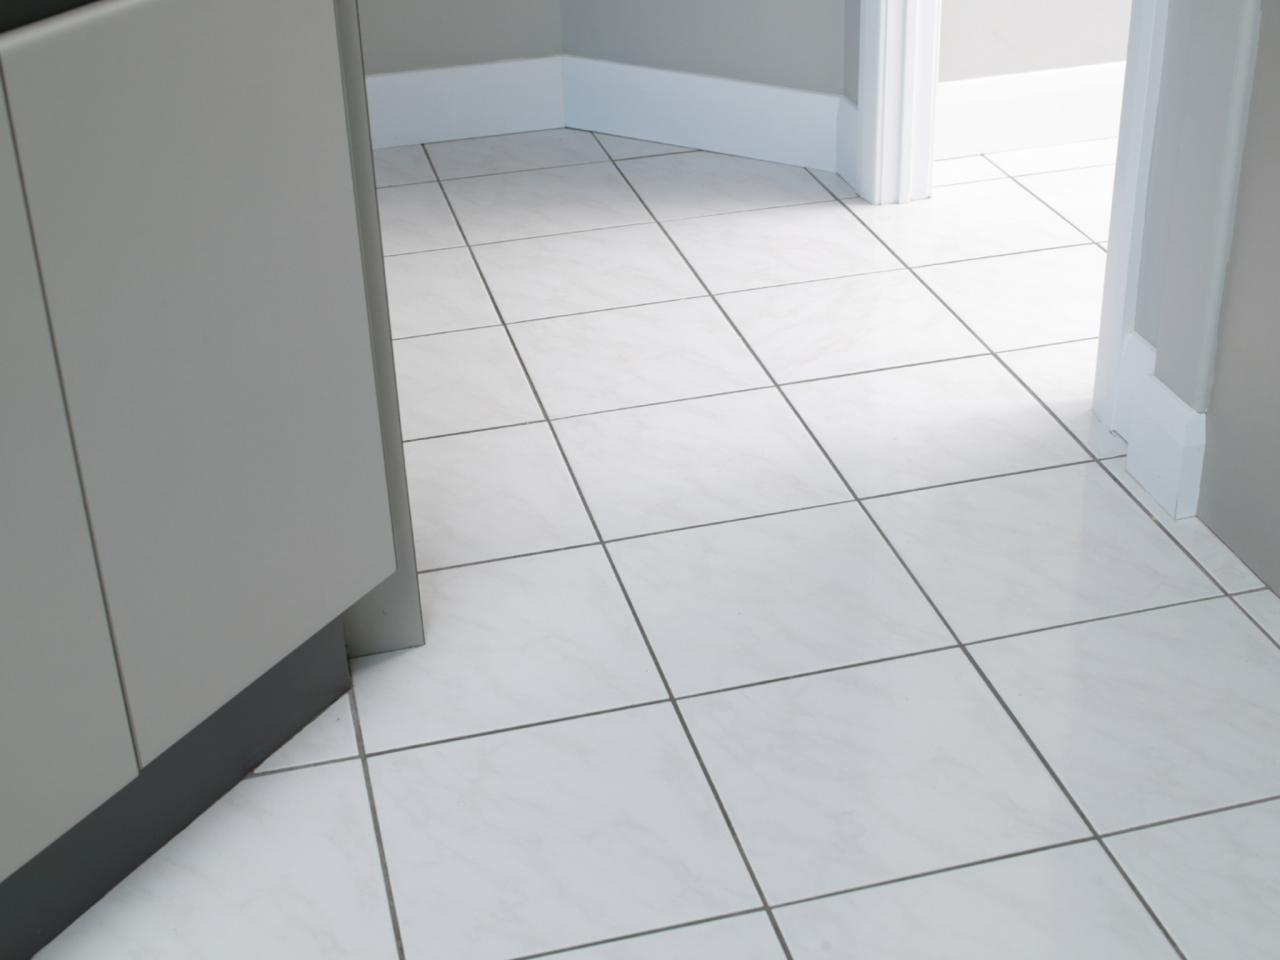 How To Keep Ceramic Tile Grout In Good, Best Way To Clean Ceramic Floor Tiles And Grout